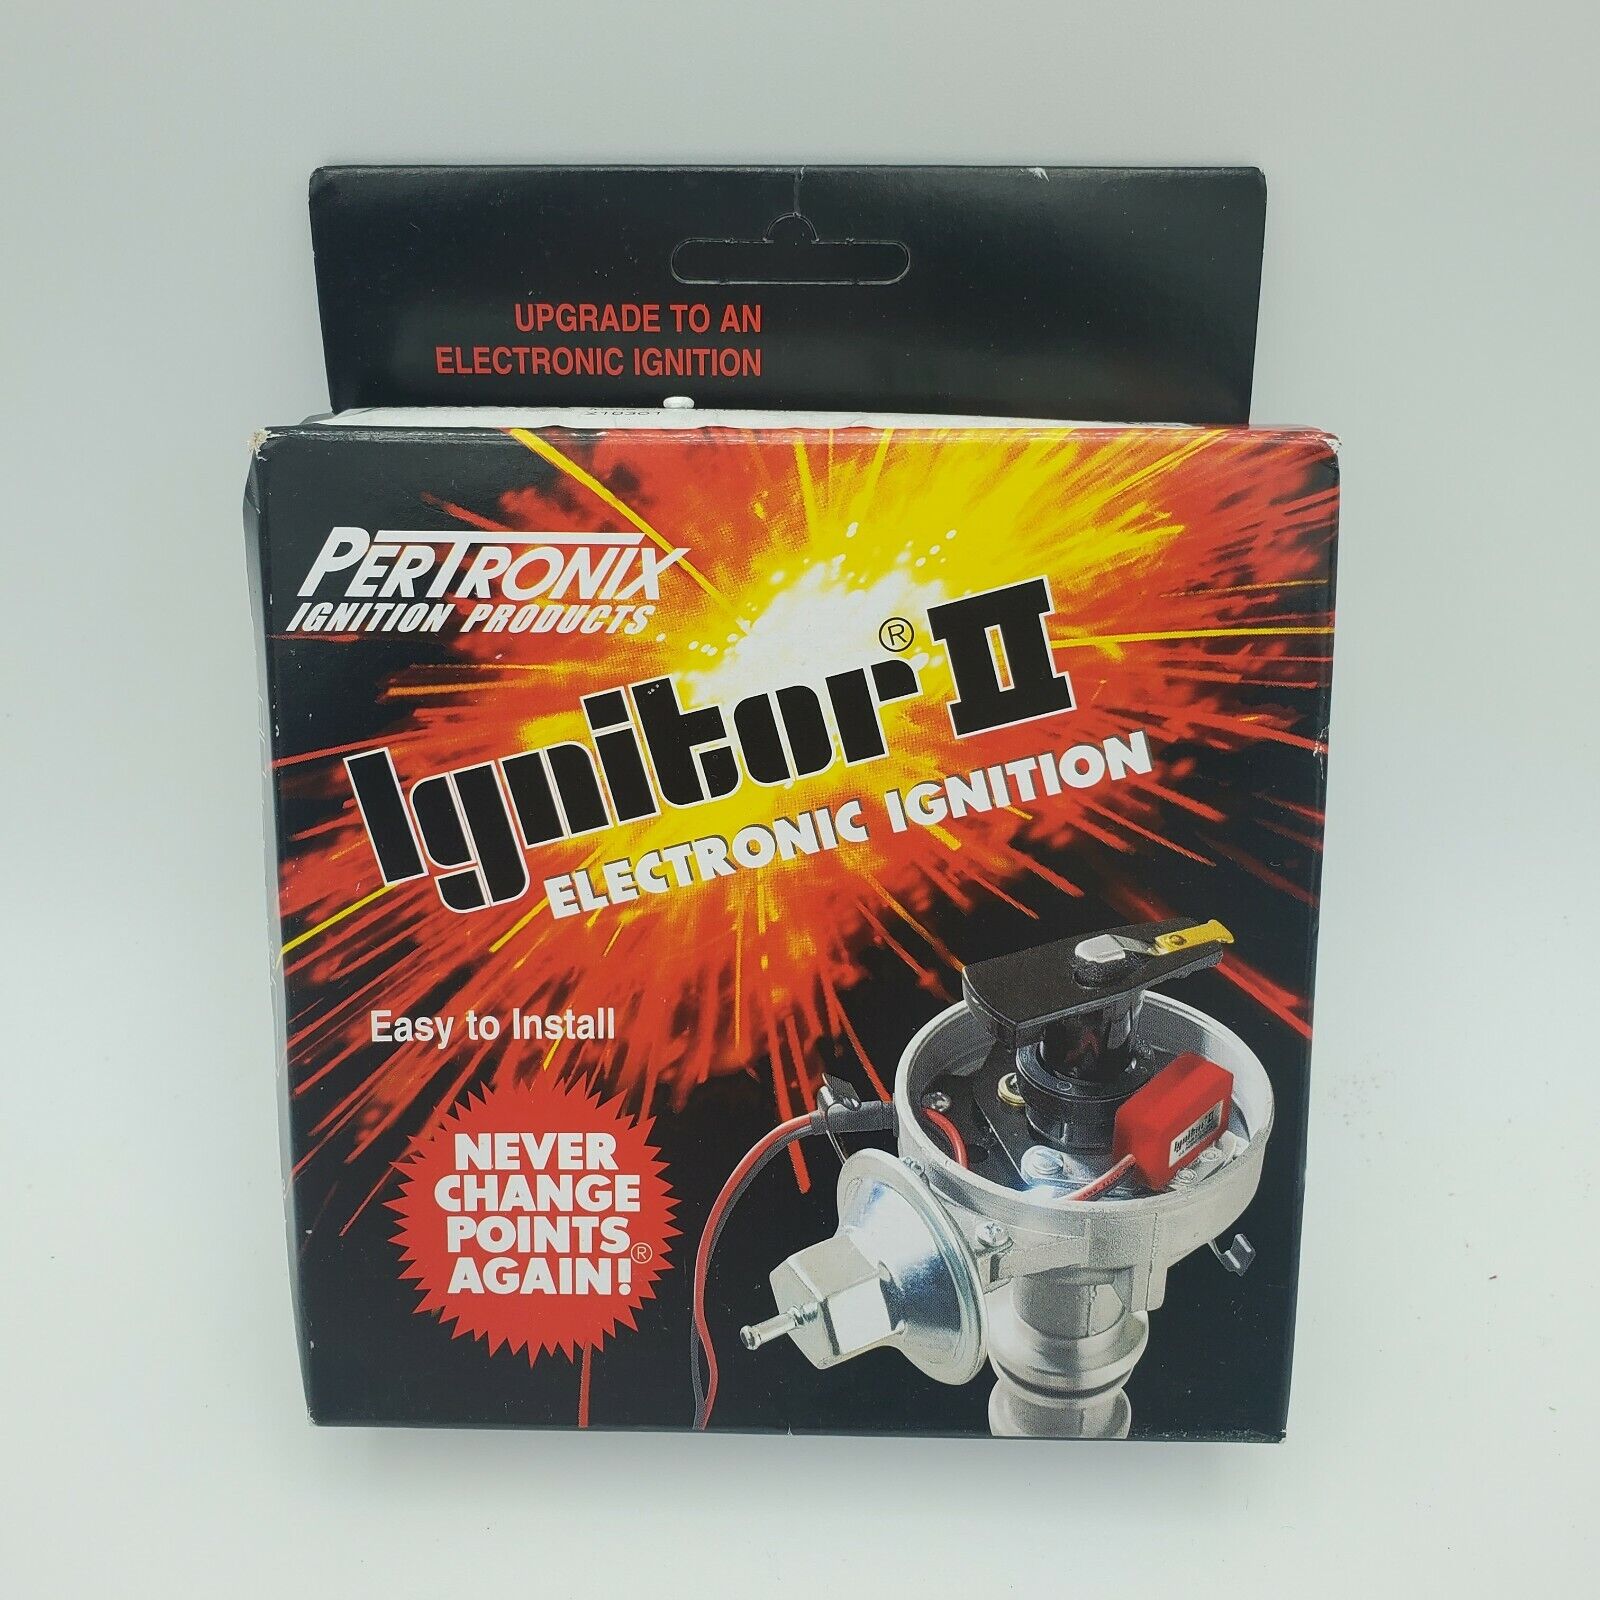 Pertronix 91181 Ignitor II Electronic Ignition for Jeep Mercruiser Chevrolet AMC